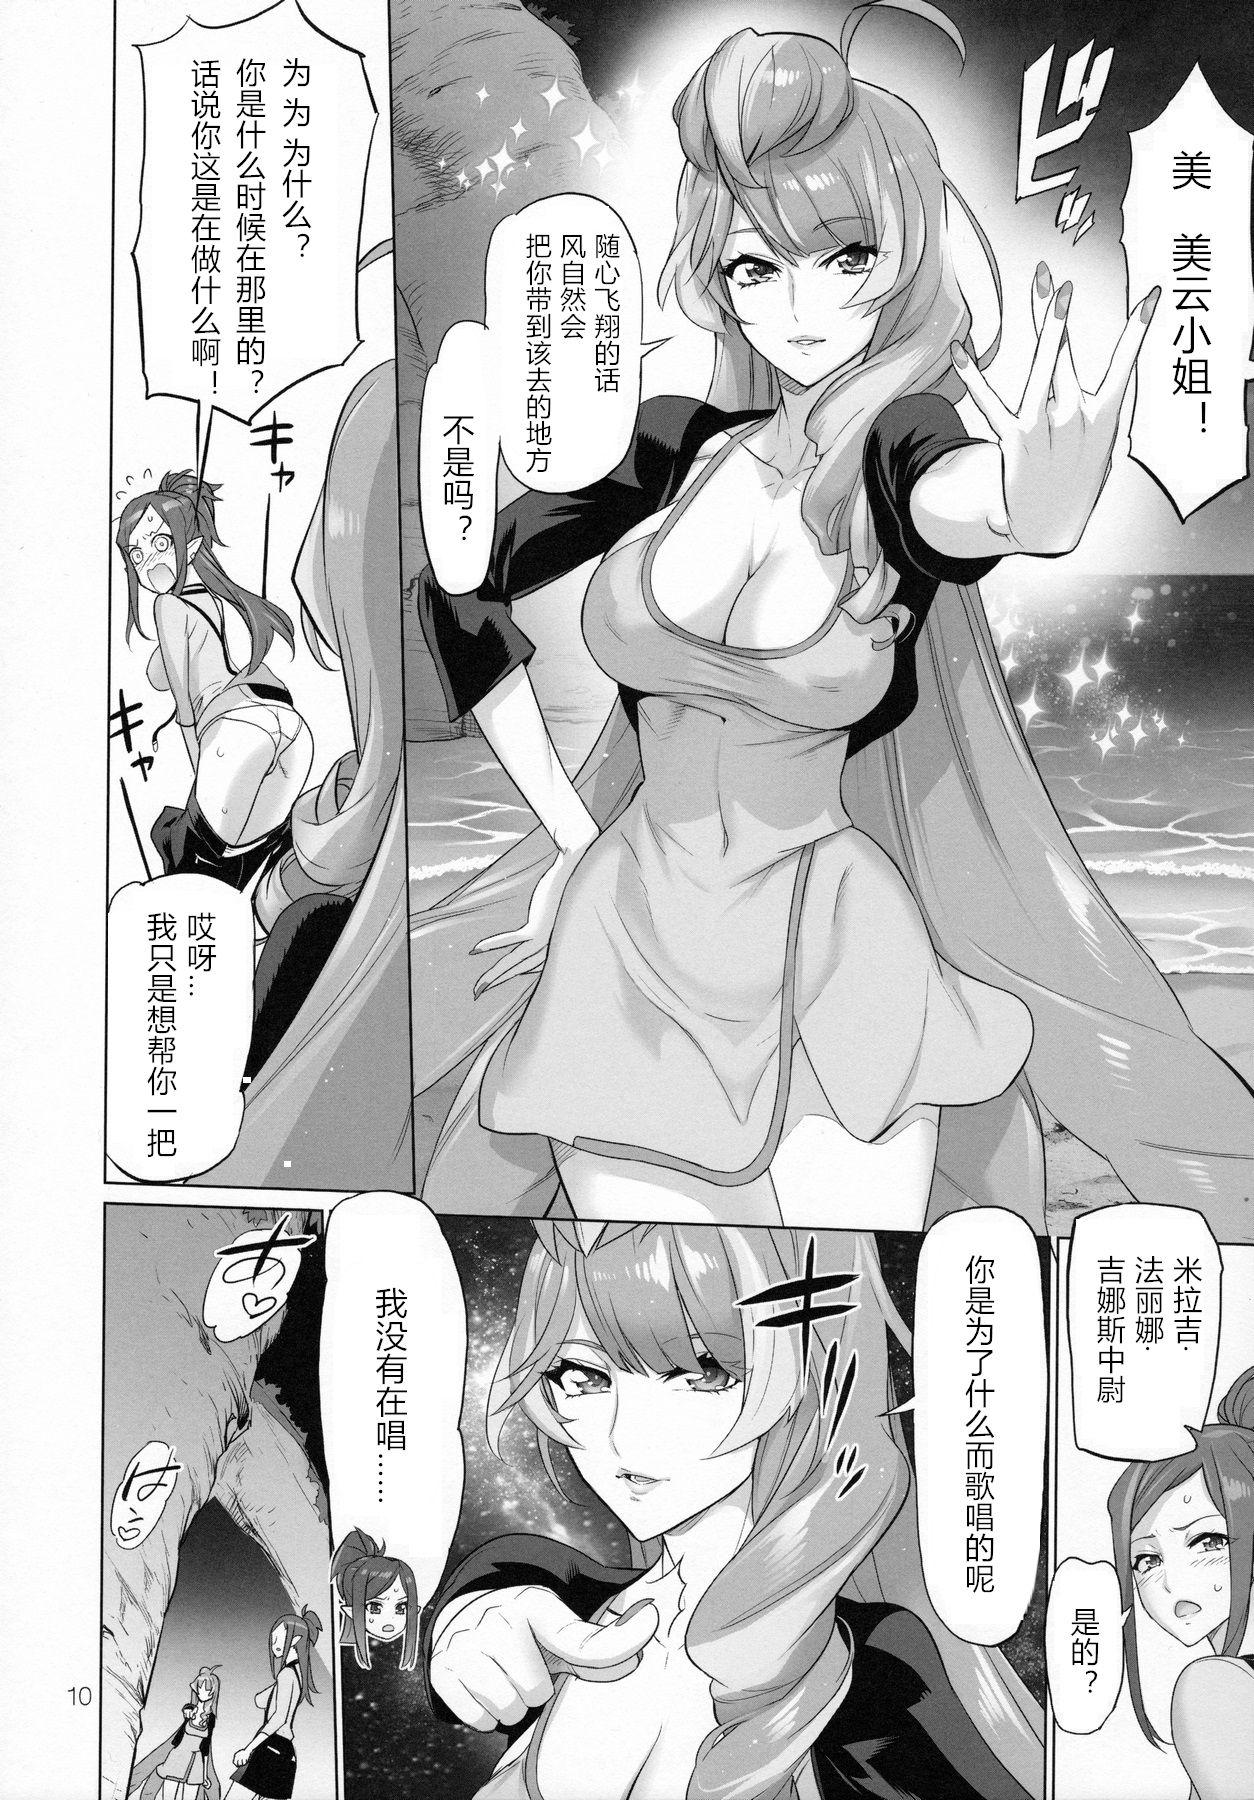 Orgy Mirage Attack! - Macross delta Chibola - Page 9